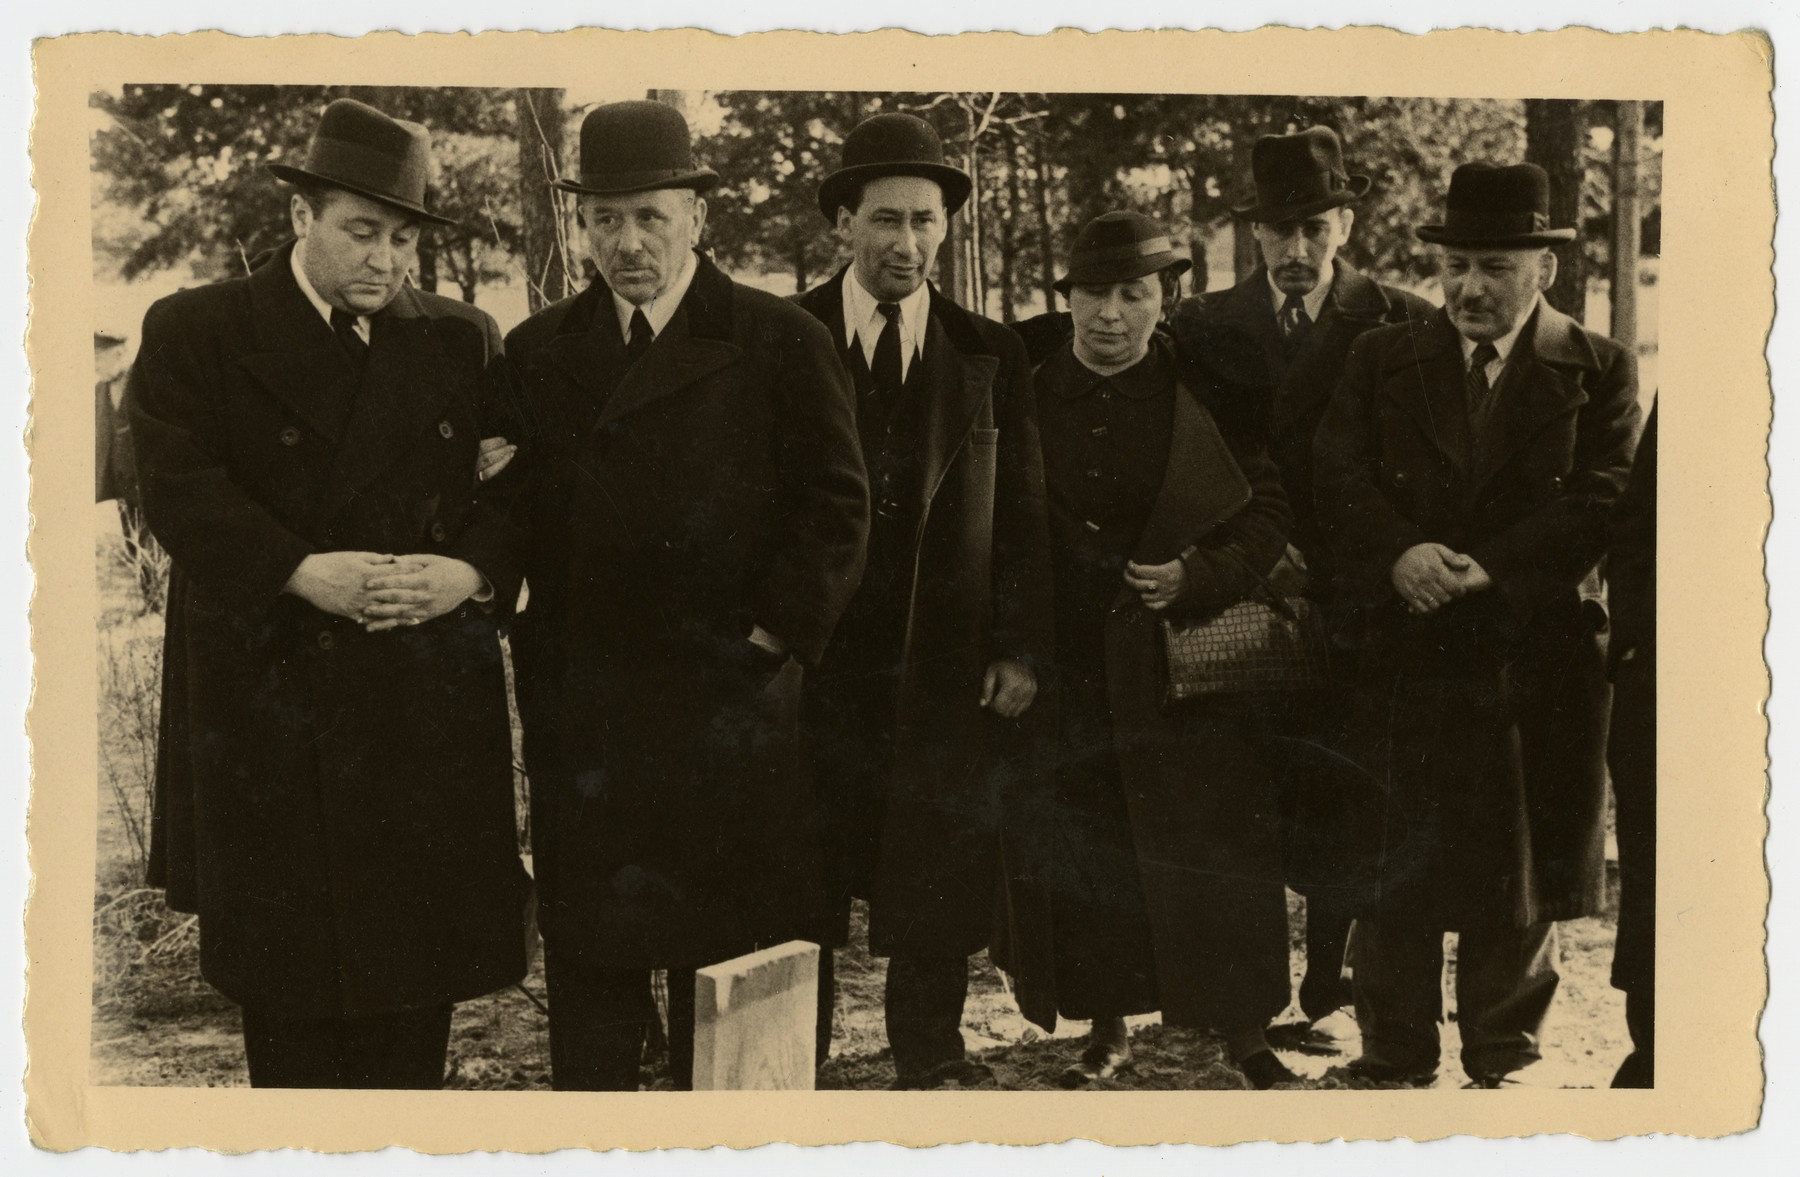 Mourners stand by the grave of Freida Albin.

Pictured are Papa, Aron, Zilla, Harri, and Abraham.